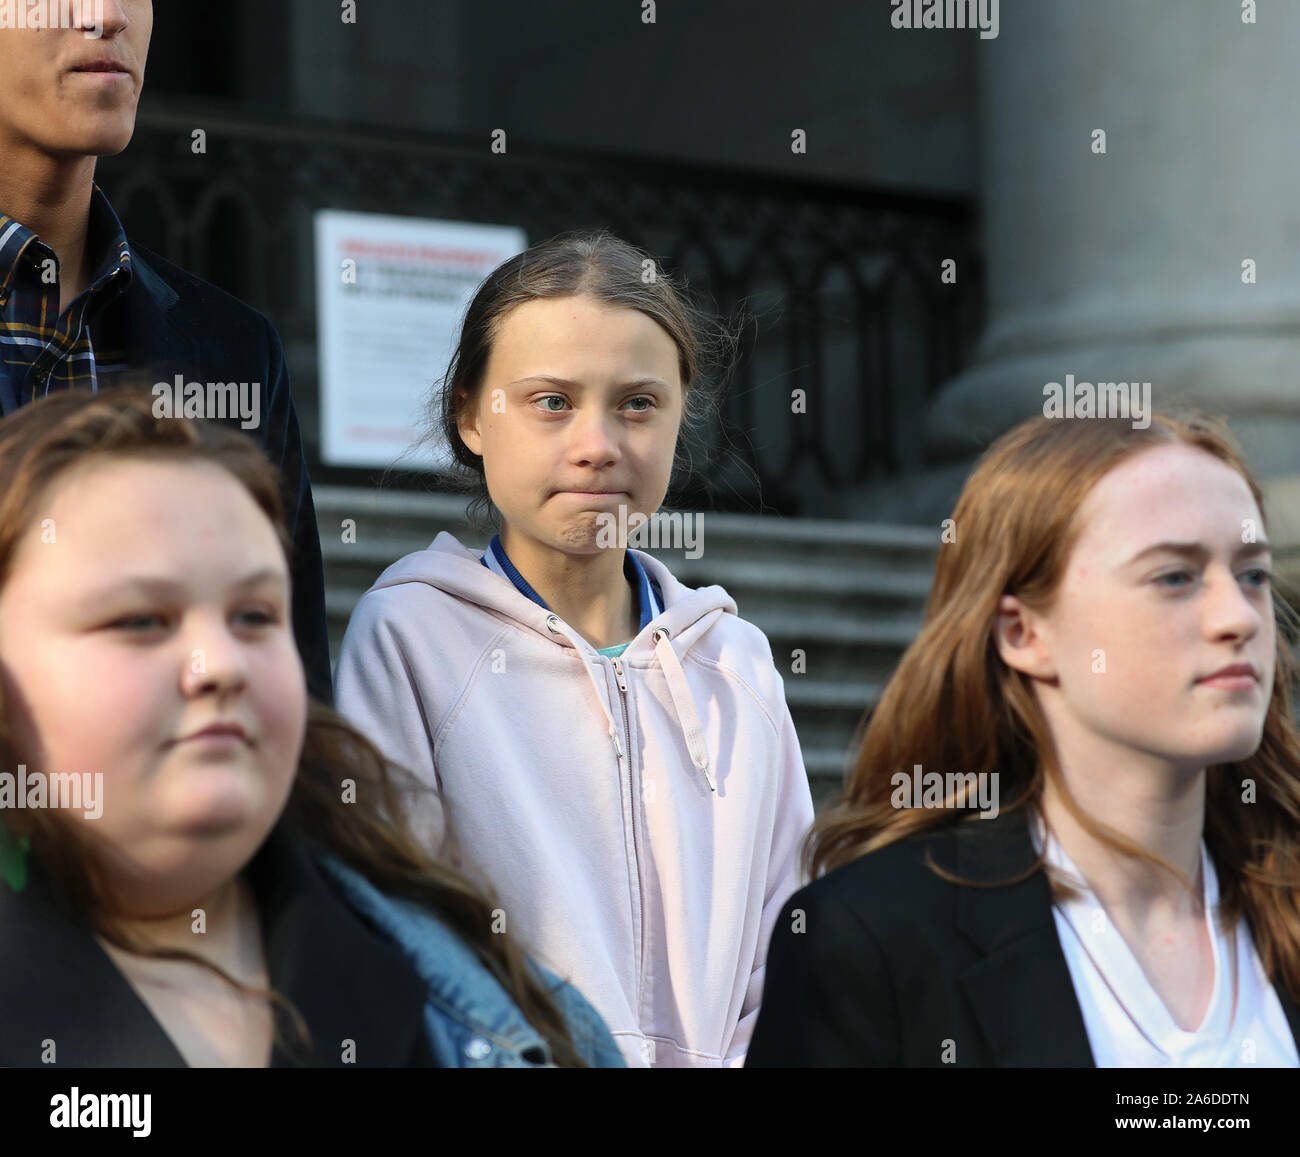 Swedish teen activist Greta Thunberg arrives for the post federal election Friday climate strike march starting and ending at the Vancouver Art Gallery in Vancouver, British Columbia on October 25, 2019. Organized by local youth-led, Sustainabiliteens, Greta and a turn out of nearly 10,000 climate activists demand action from industry and the various levels of government and are supporting the 15-youth who announced their plans to sue the federal government alleging it has contributed to climate change. Photo by Heinz Ruckemann/UPI Stock Photo